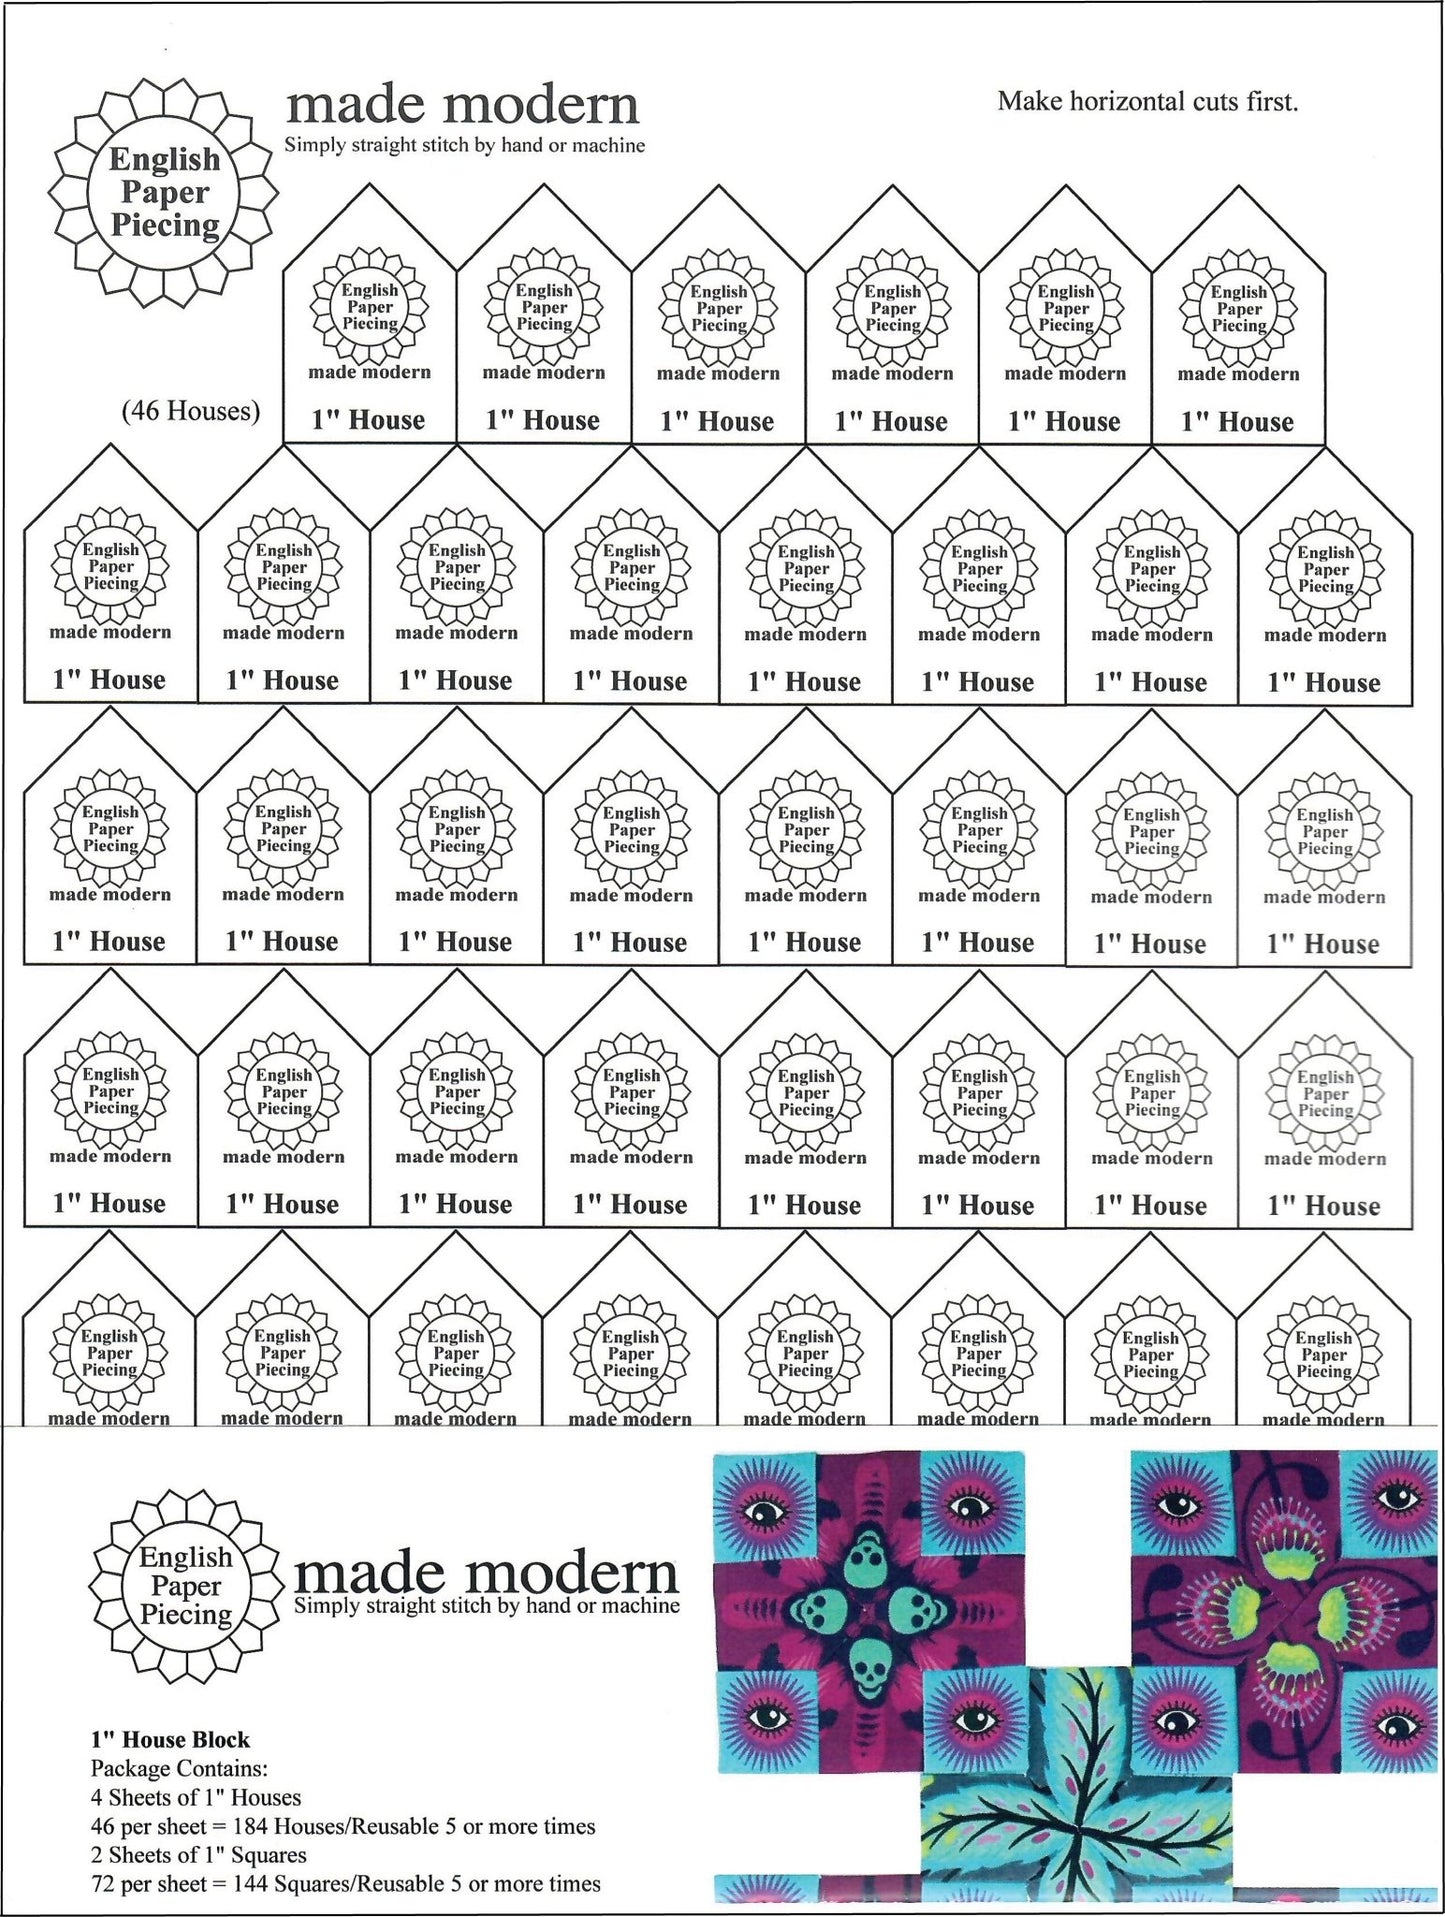 English Paper Piecing Made Modern | Templates for 1" Houses and 1" Squares - Sewforever